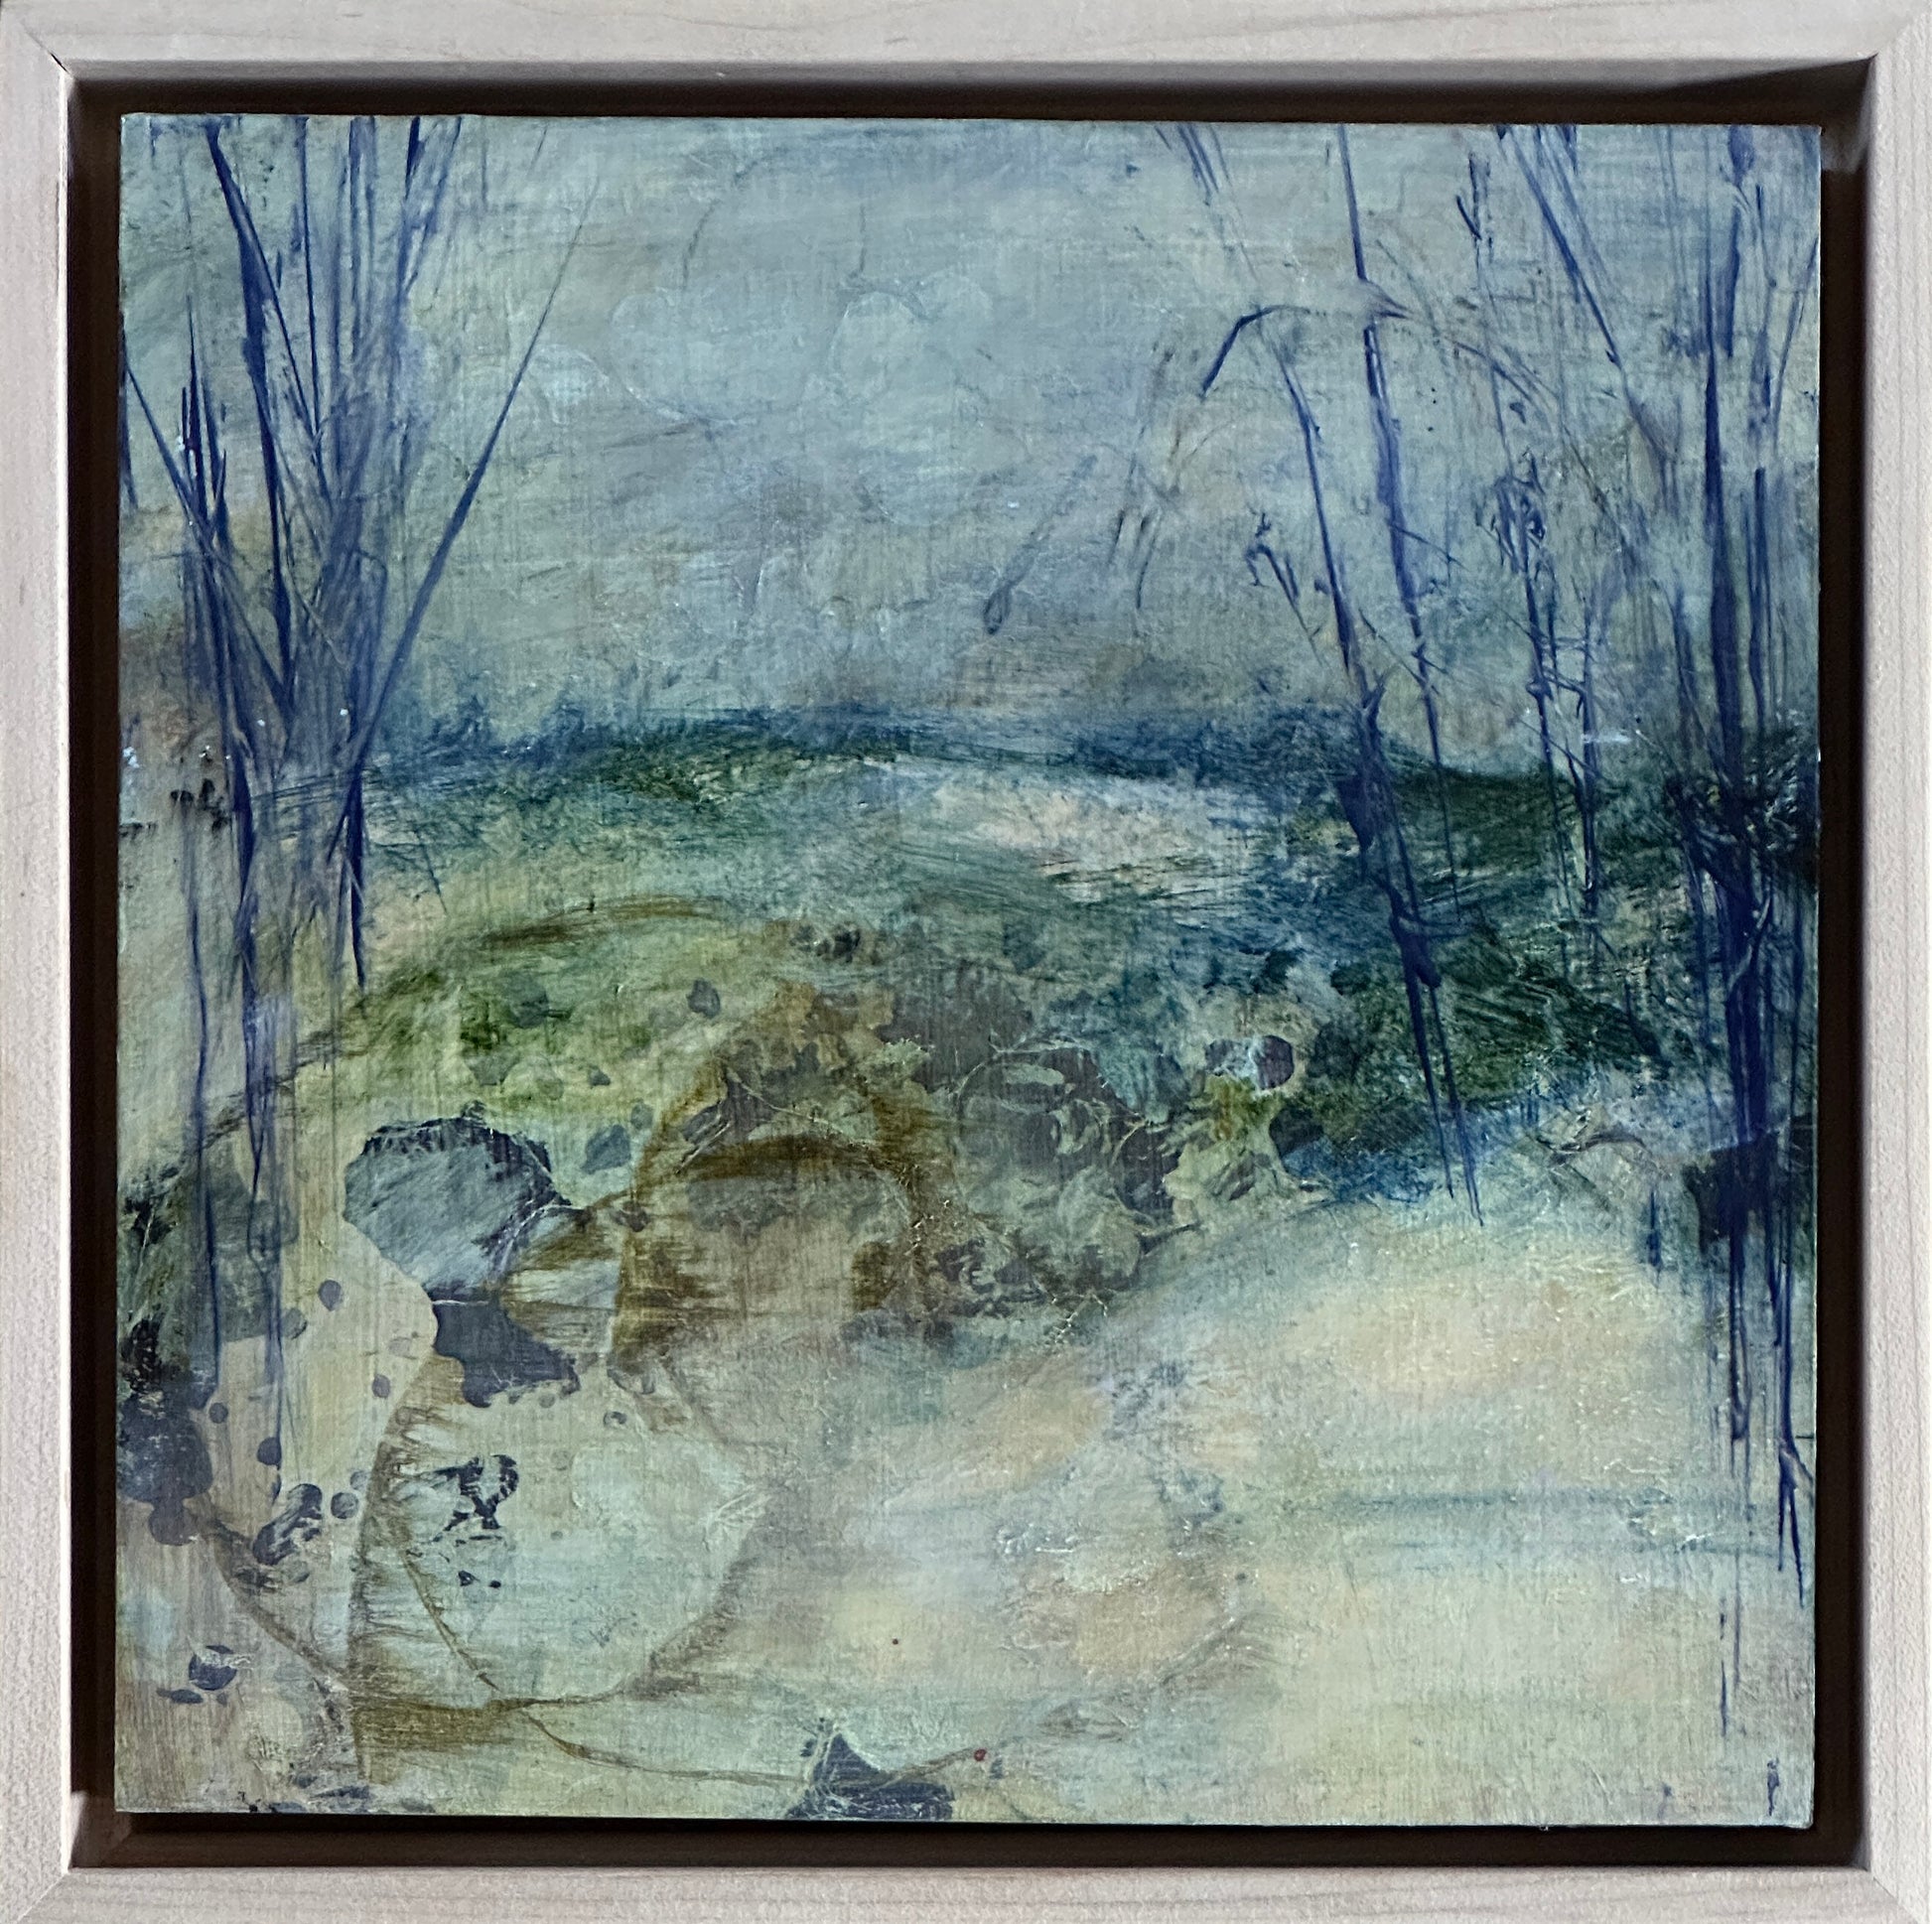 8 x 8 x 1.5-inch, framed, impression of dry land adjacent to the water along a riverbank.  Acrylic painting on cradled panel with natural wood frame.  By Cumming, GA artist, Juanita Bellavance. Part of our 25 Days of Minis 2022 collection.  Collect them all!